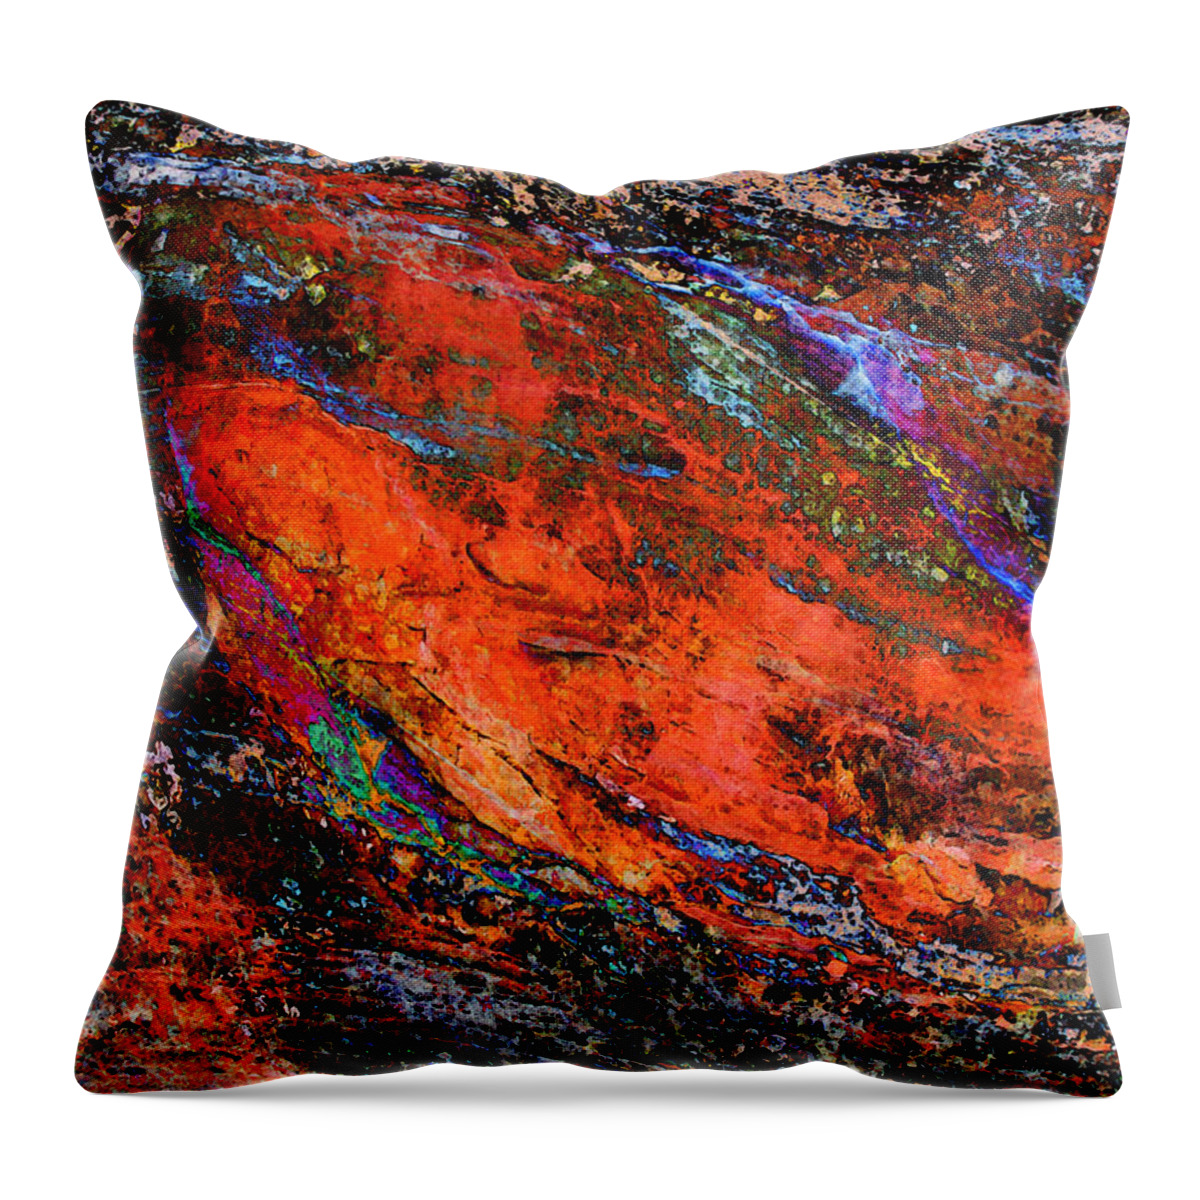  Stone Throw Pillow featuring the photograph Catching Fire by Stephanie Grant